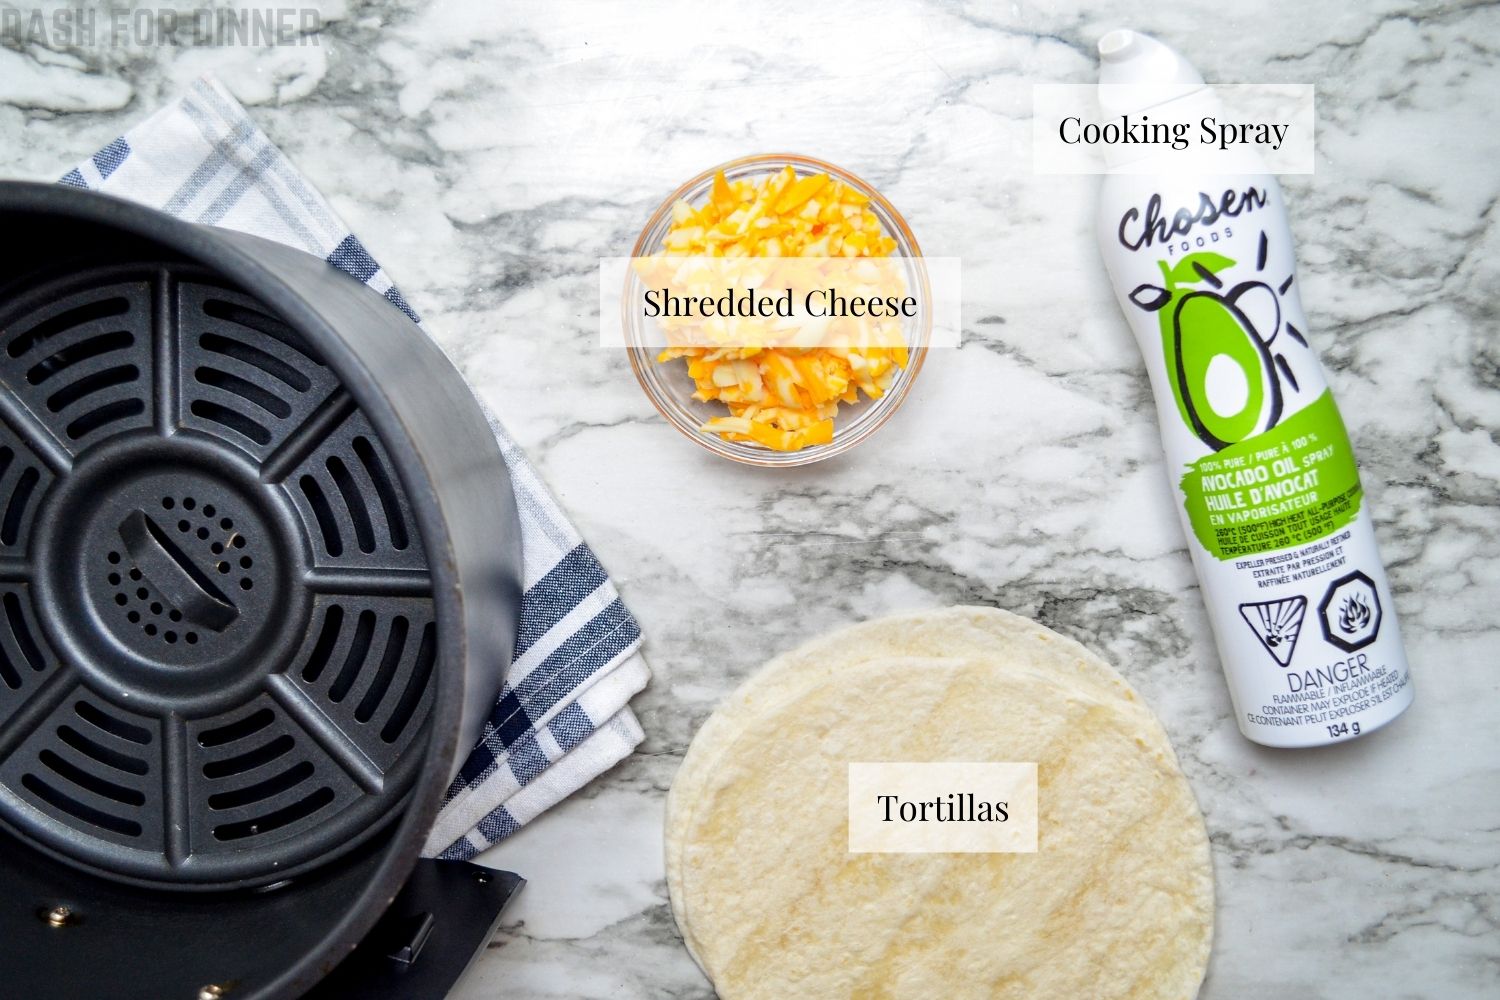 The ingredients needed to make quesadillas in the air fryer: cheese, tortillas, and cooking spray.